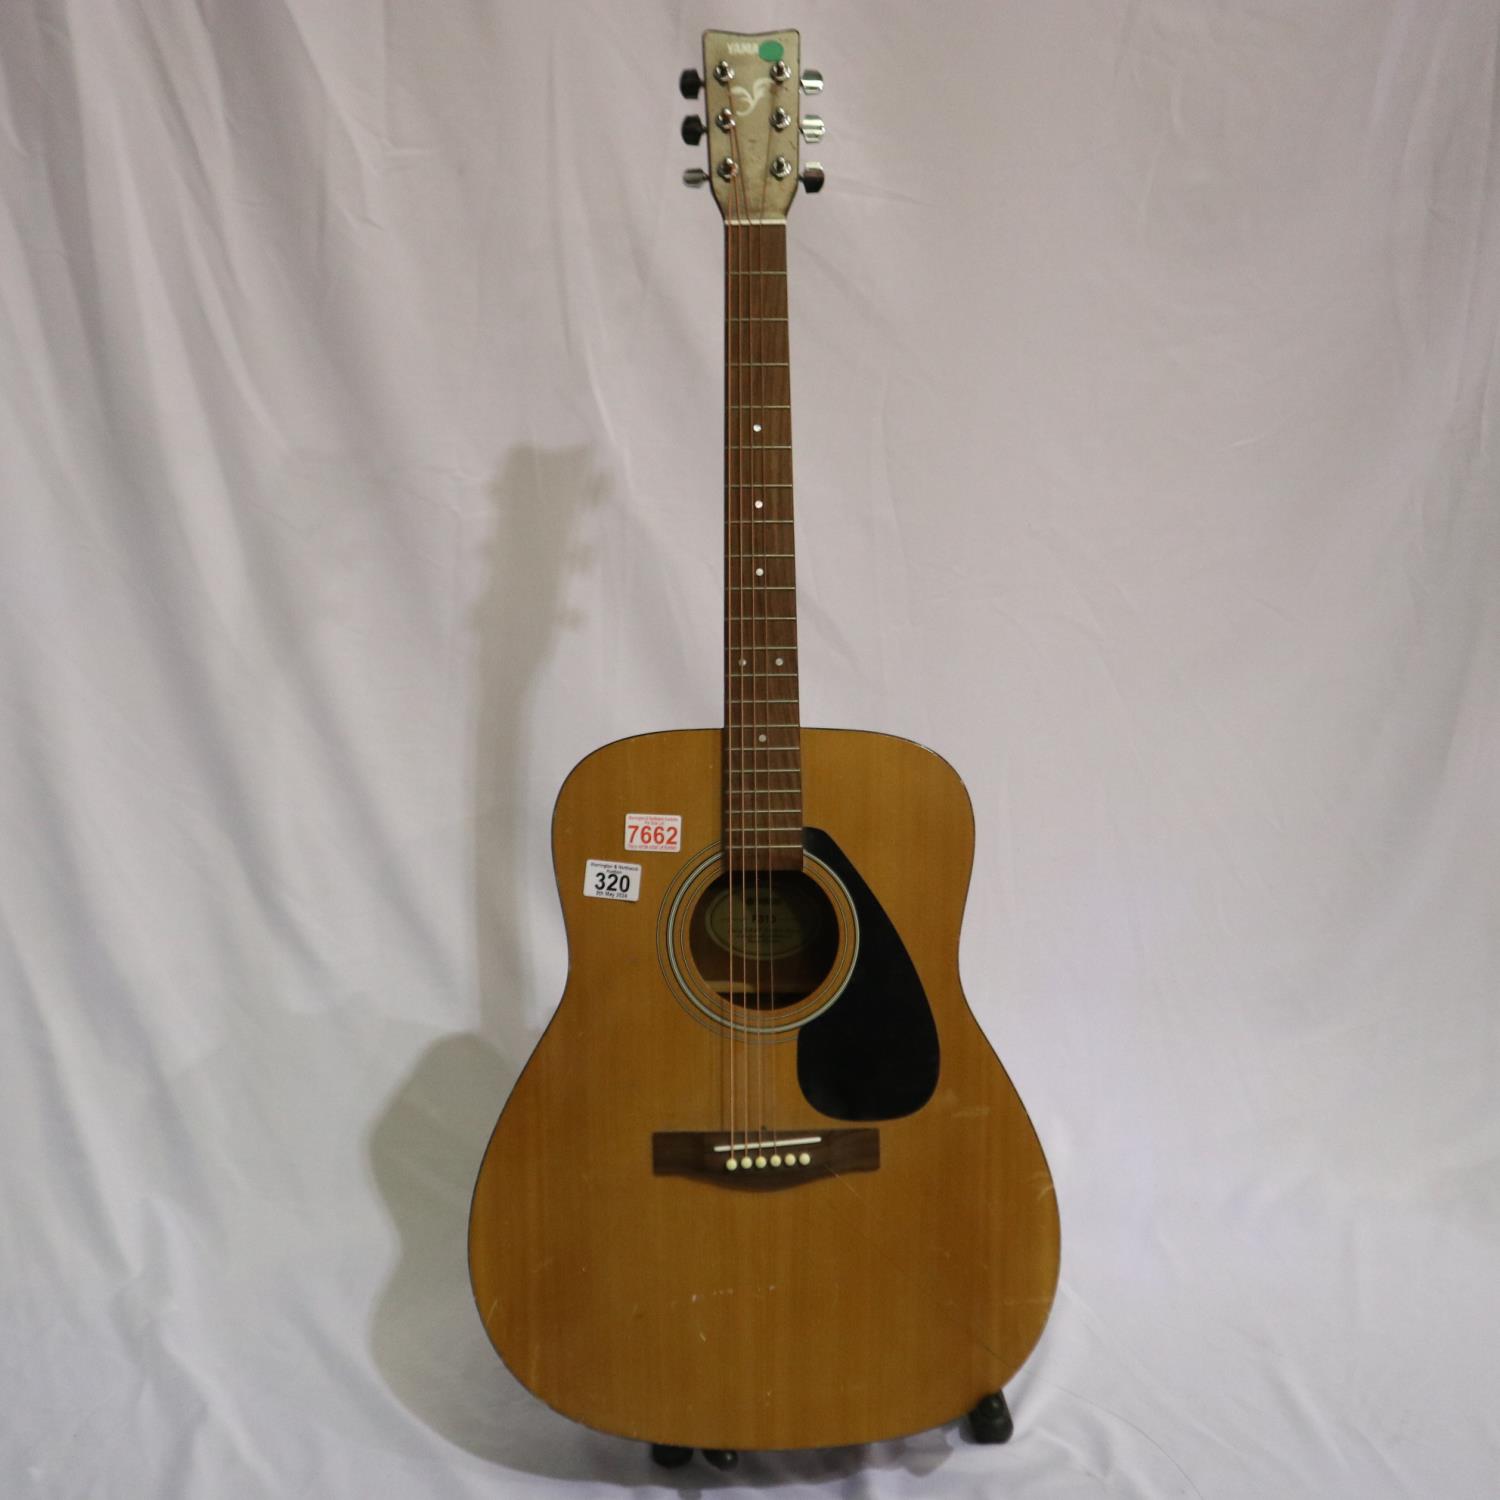 Yamaha F310 acoustic guitar. UK P&P Group 3 (£30+VAT for the first lot and £8+VAT for subsequent